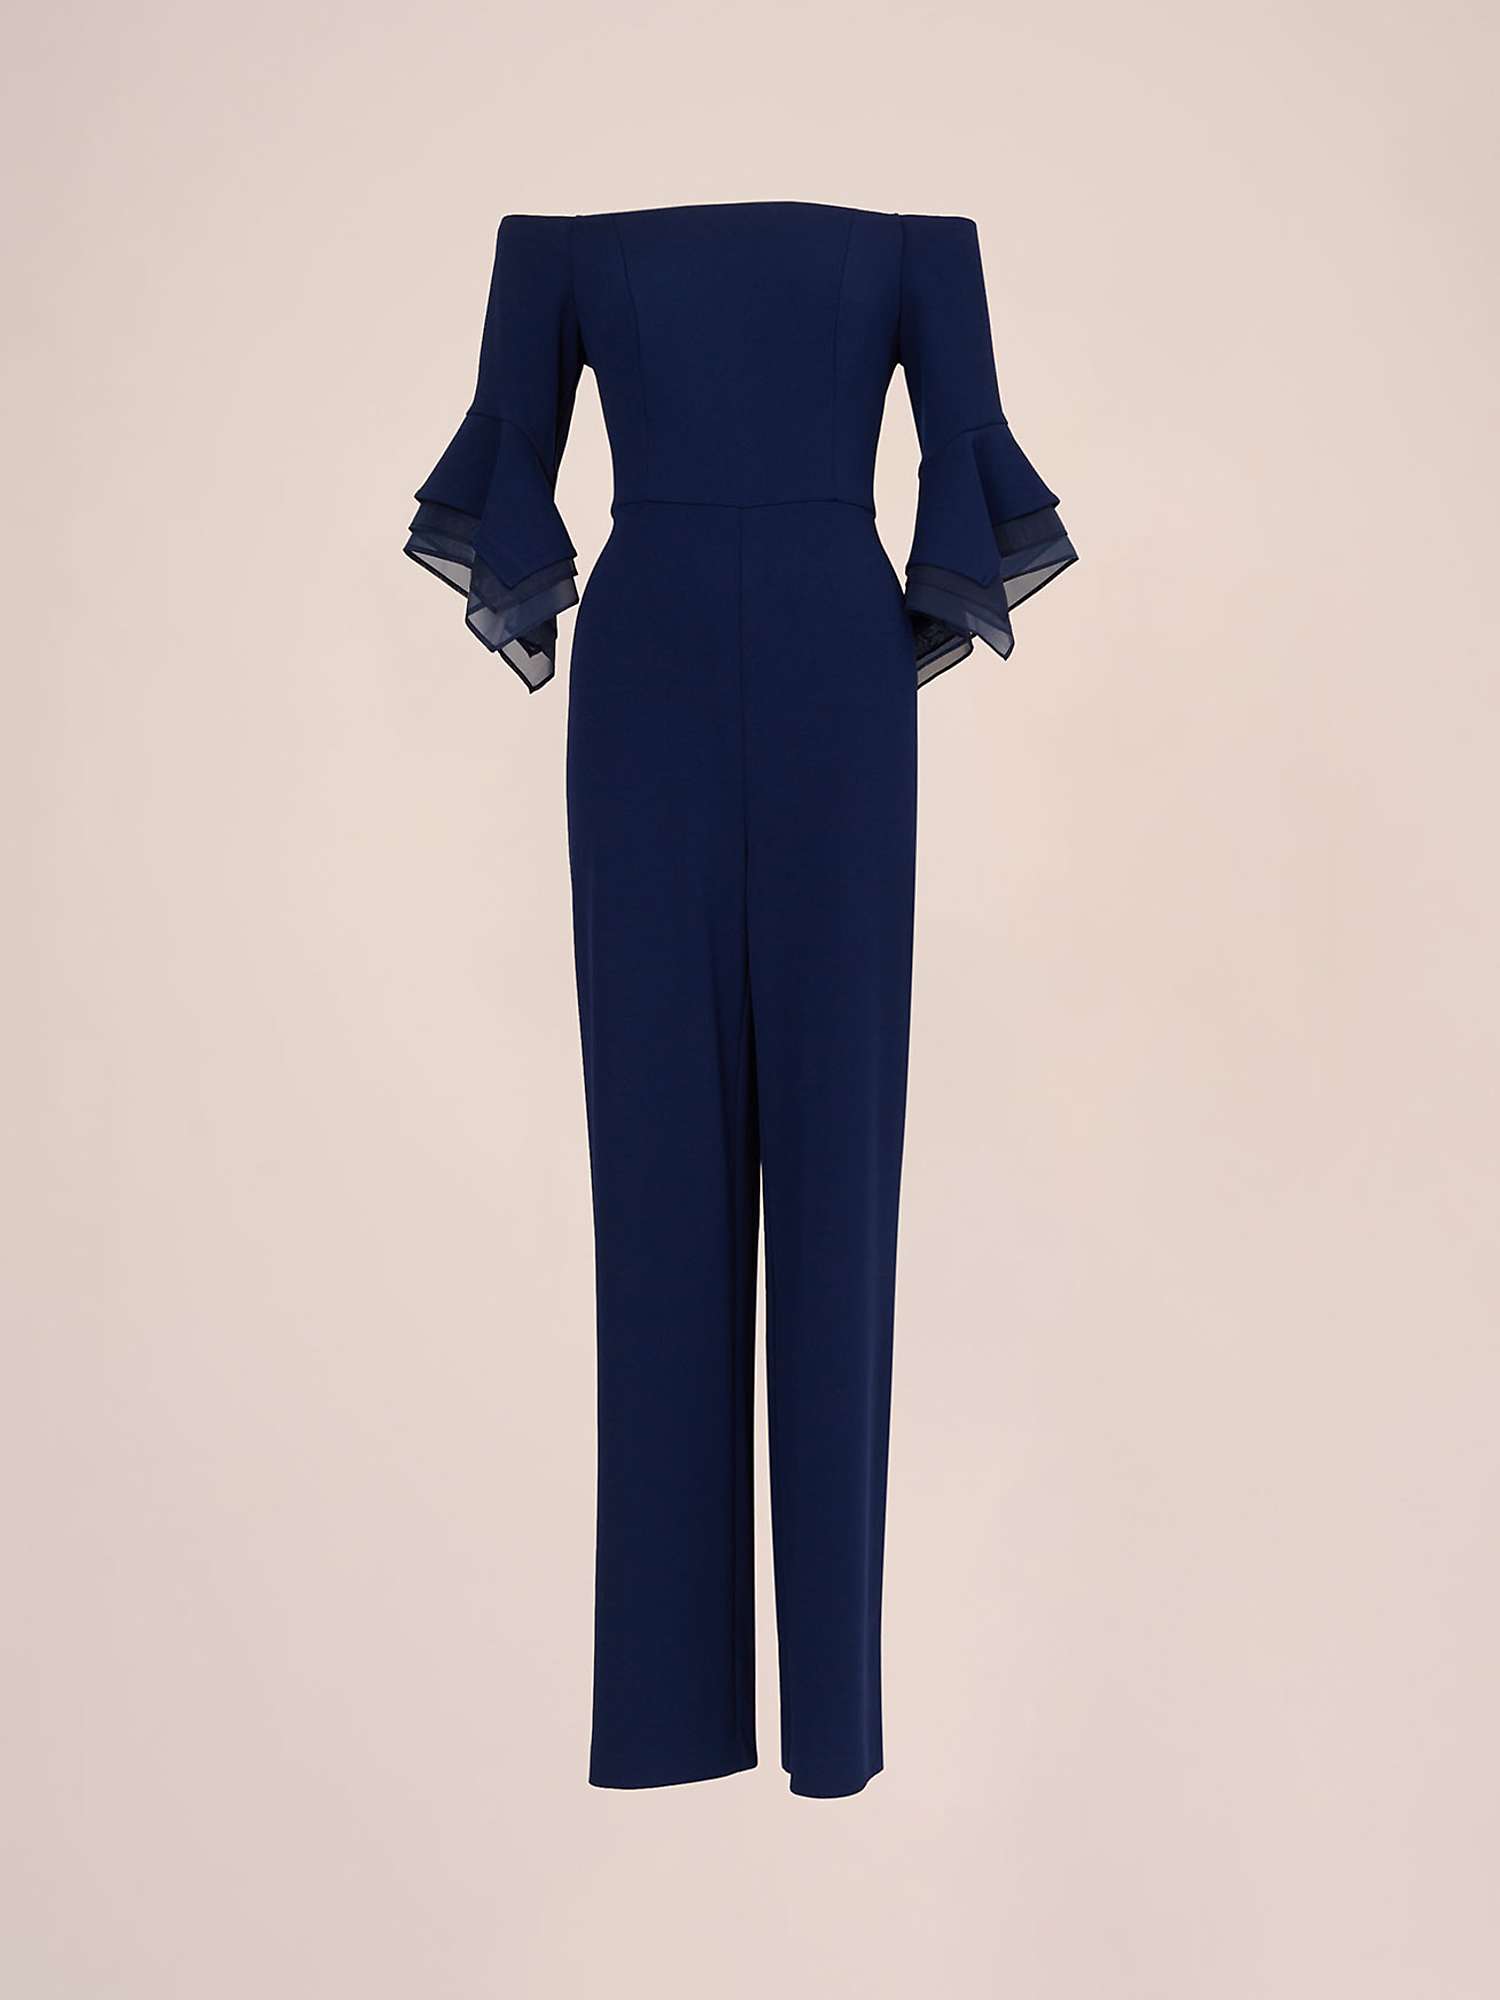 Adrianna Papell Organza Crepe Jumpsuit, Navy at John Lewis & Partners